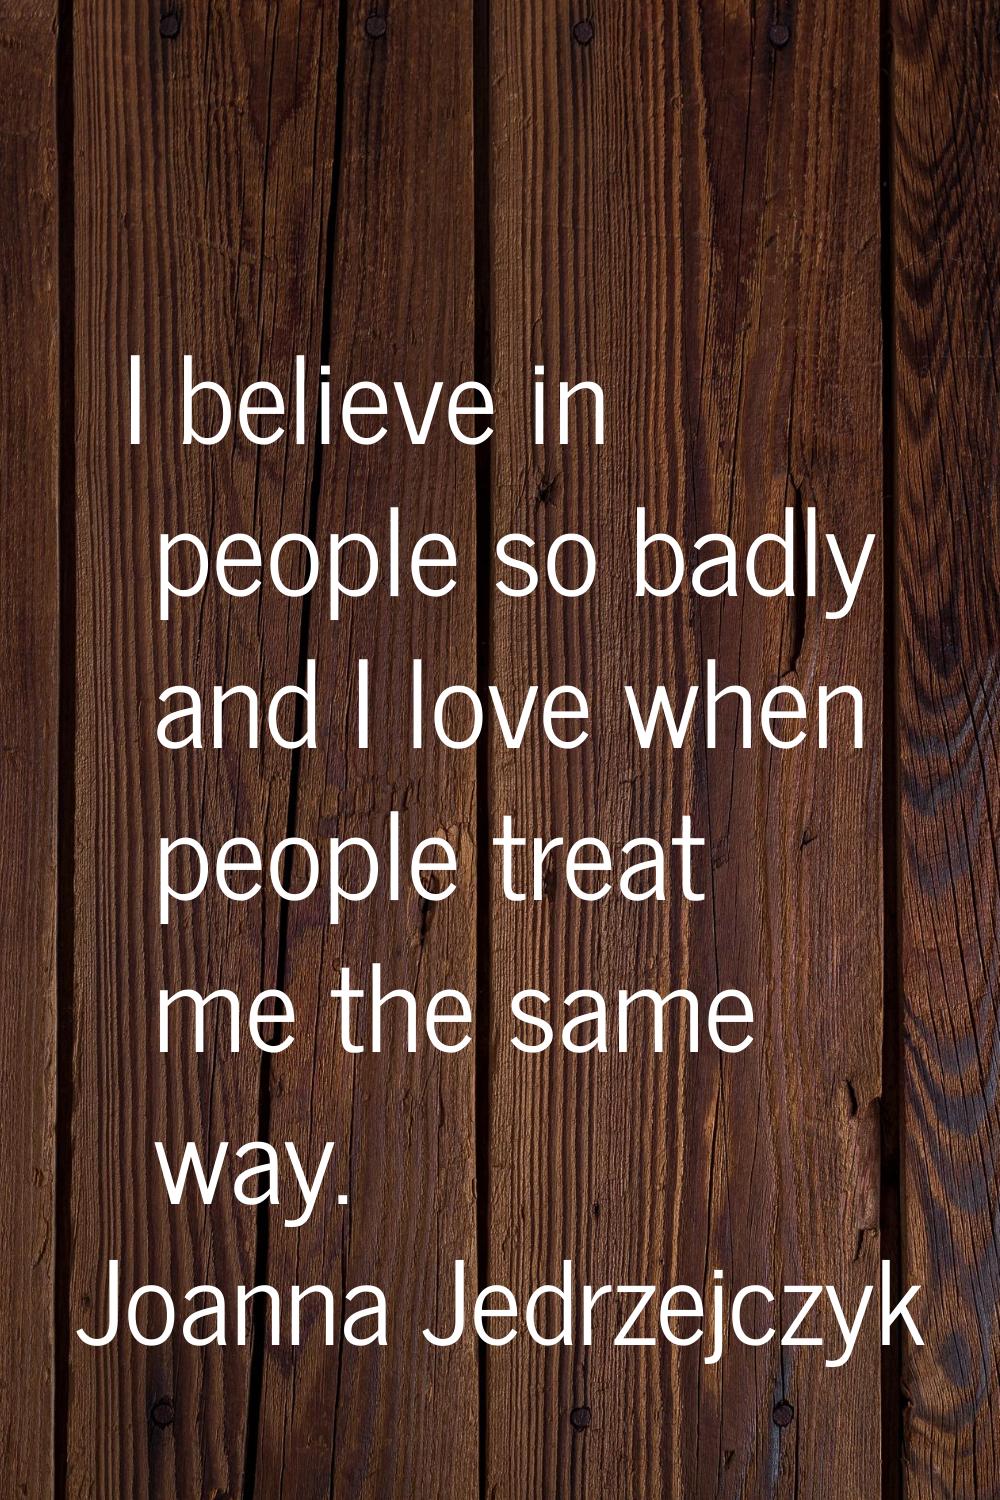 I believe in people so badly and I love when people treat me the same way.